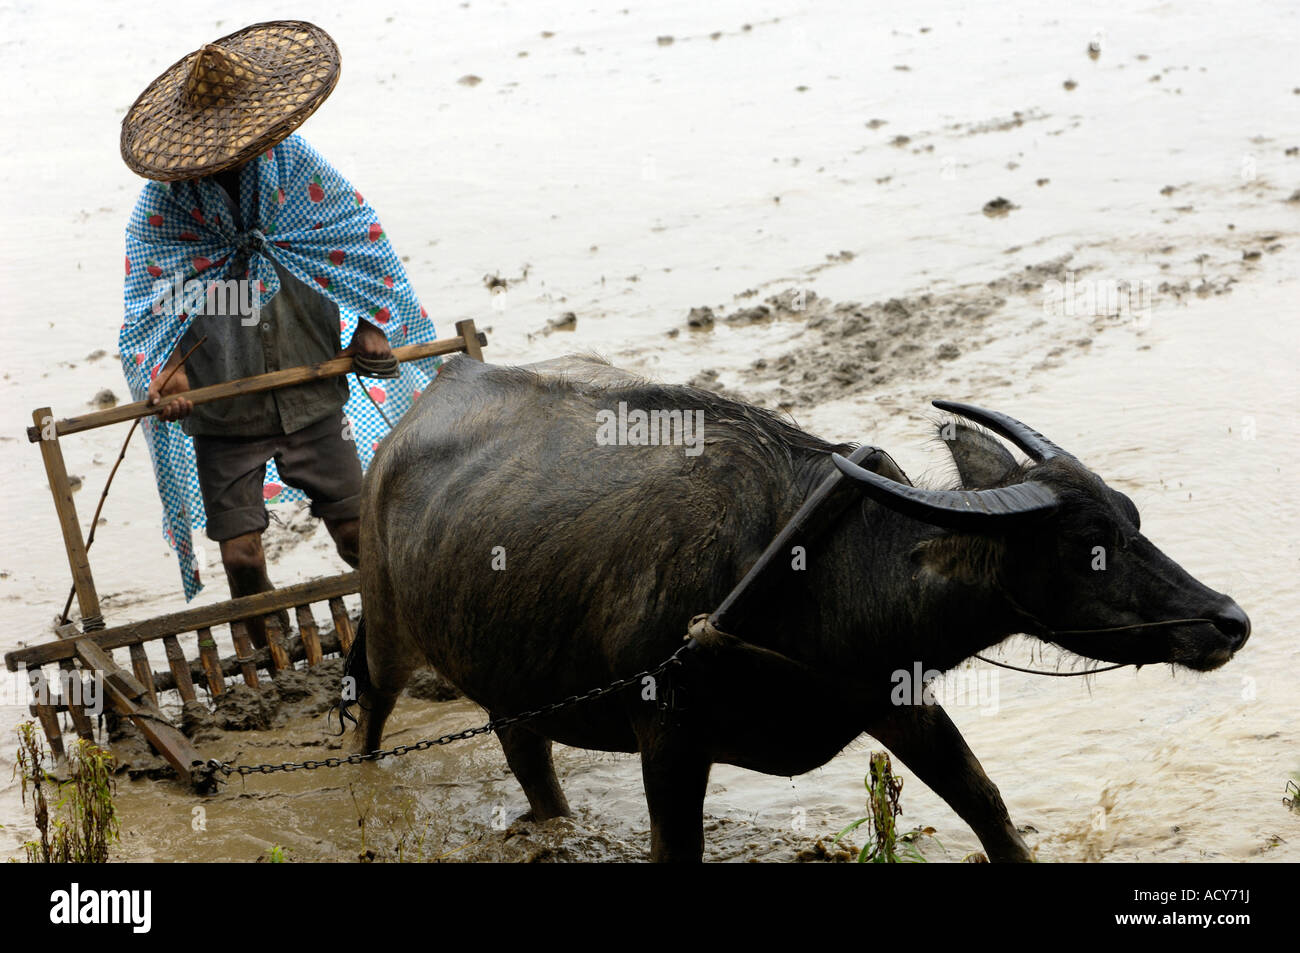 A farmer ploughs on a paddy field in a traditional way with help of a buffalo in Likeng village Wuyuan Jiangxi China 13-Jun-2007 Stock Photo